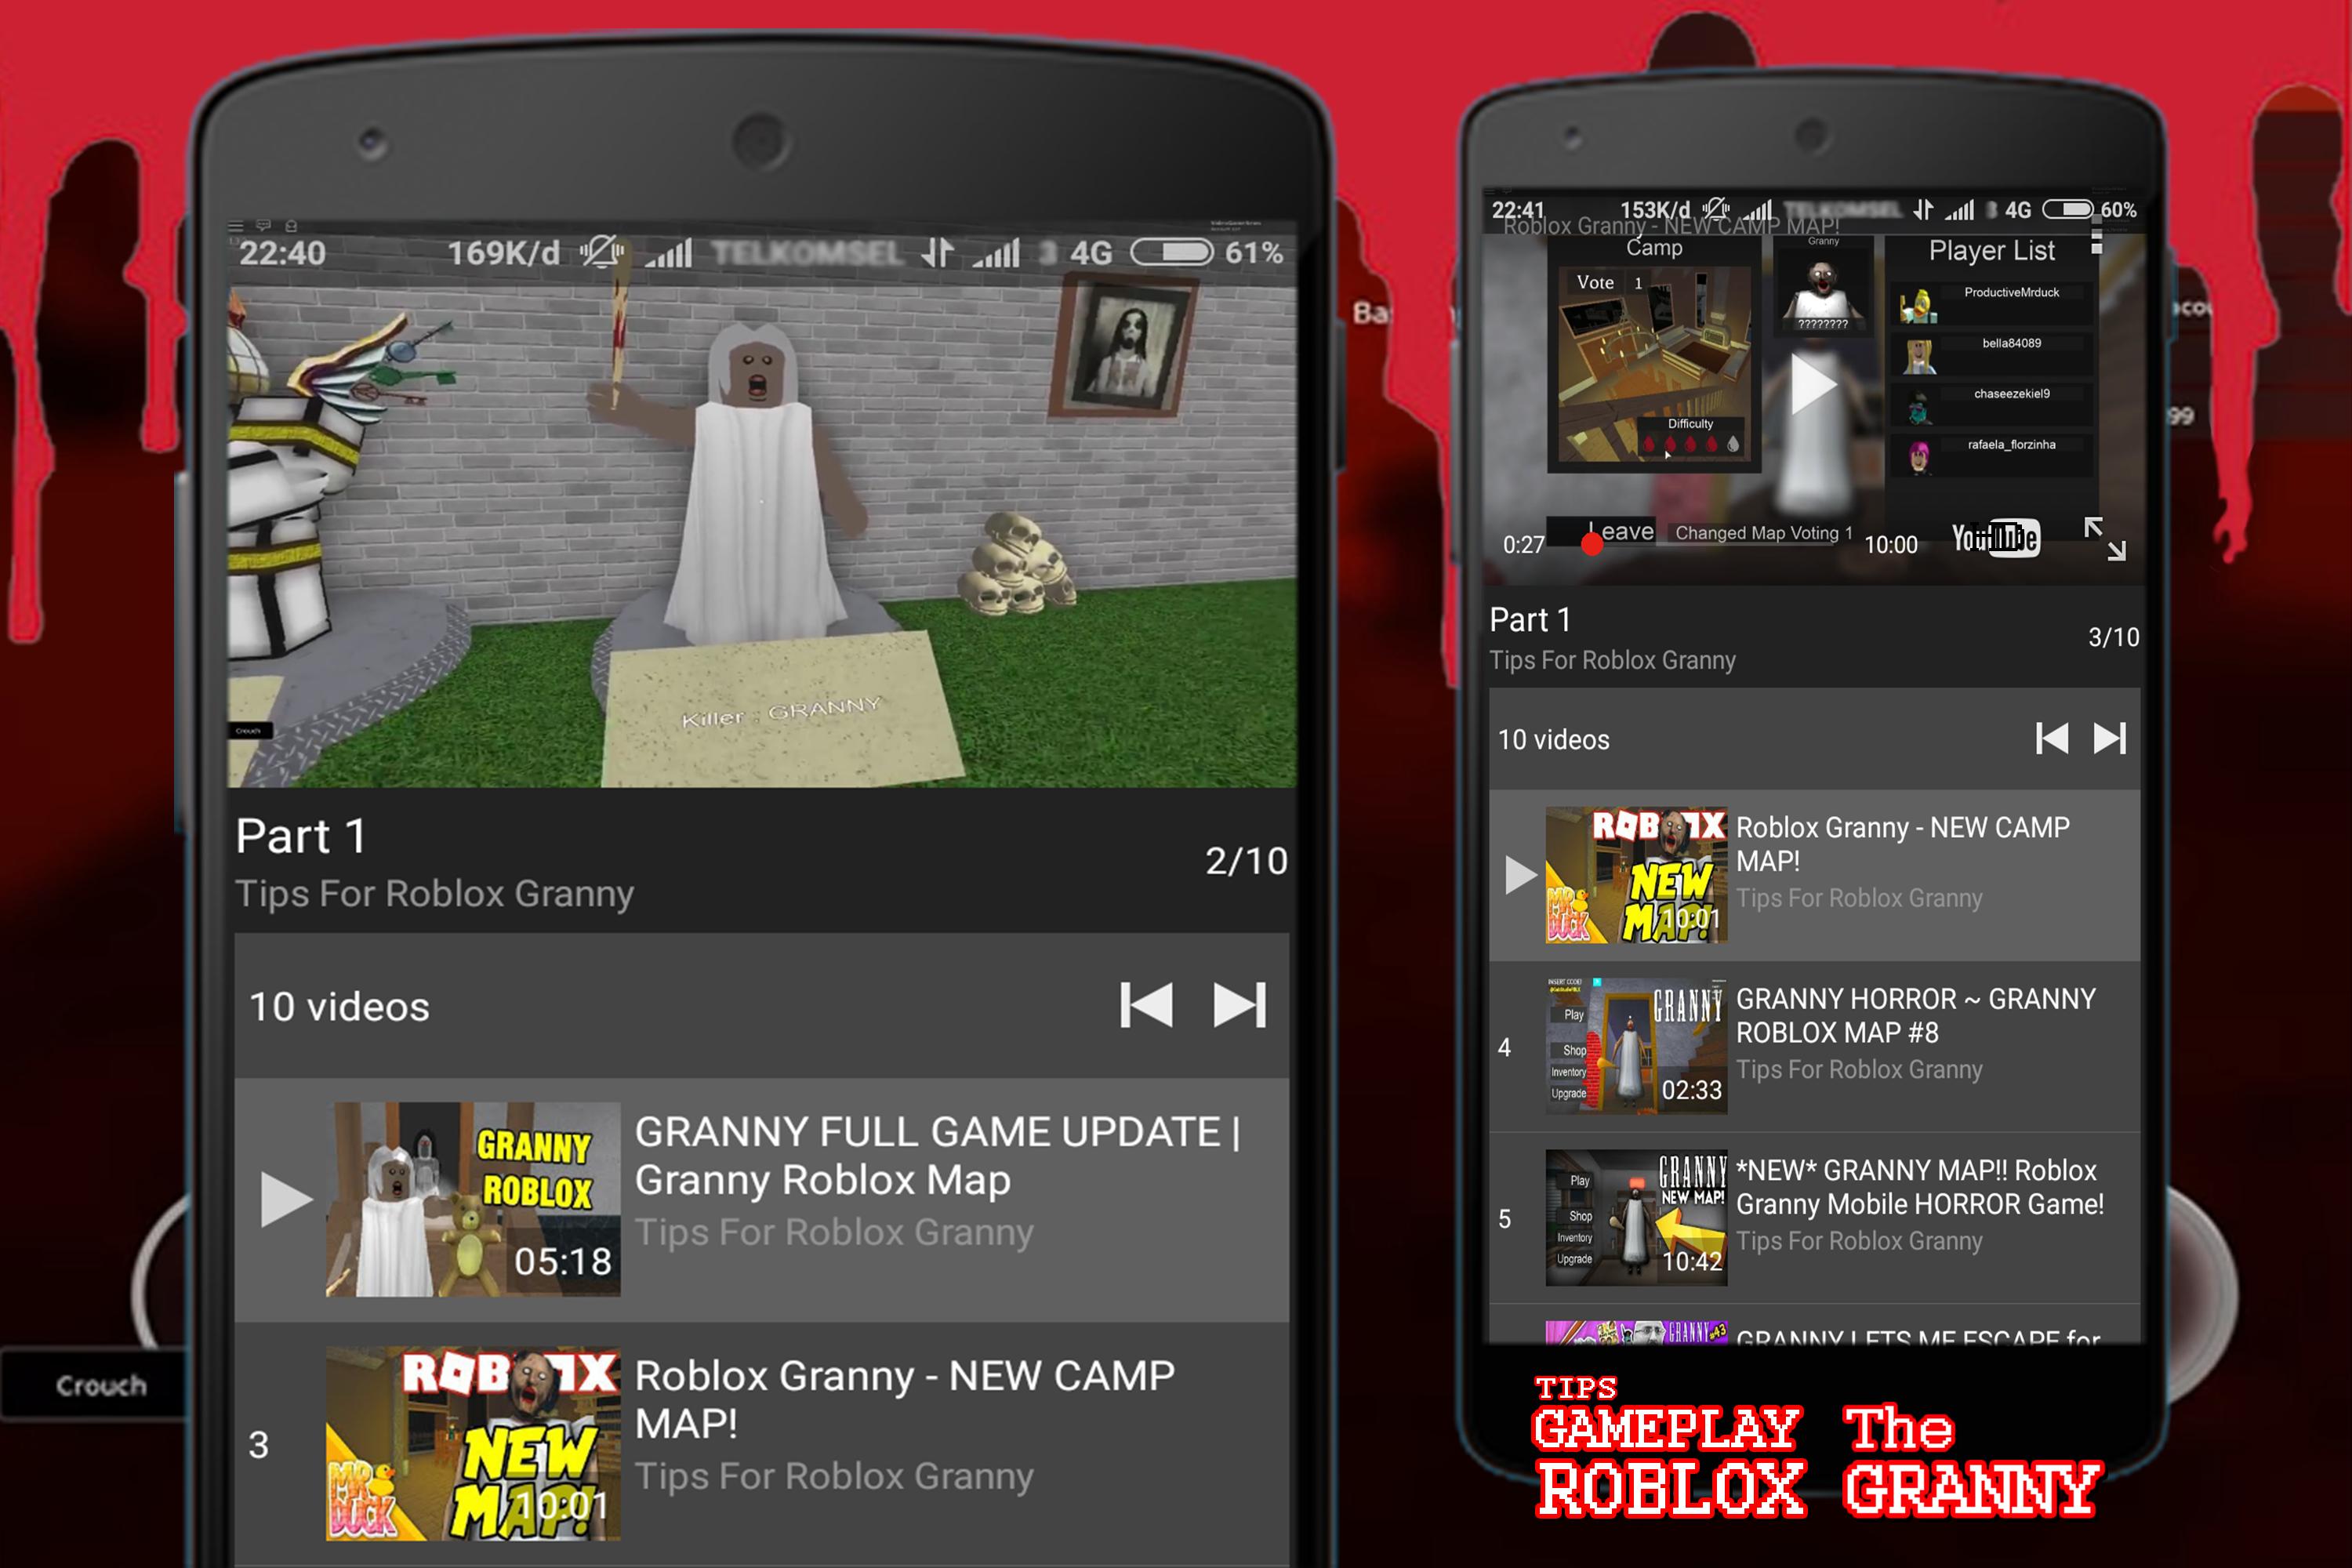 Tips For Roblox Granny Guide Video For Android Apk Download - roblox granny video